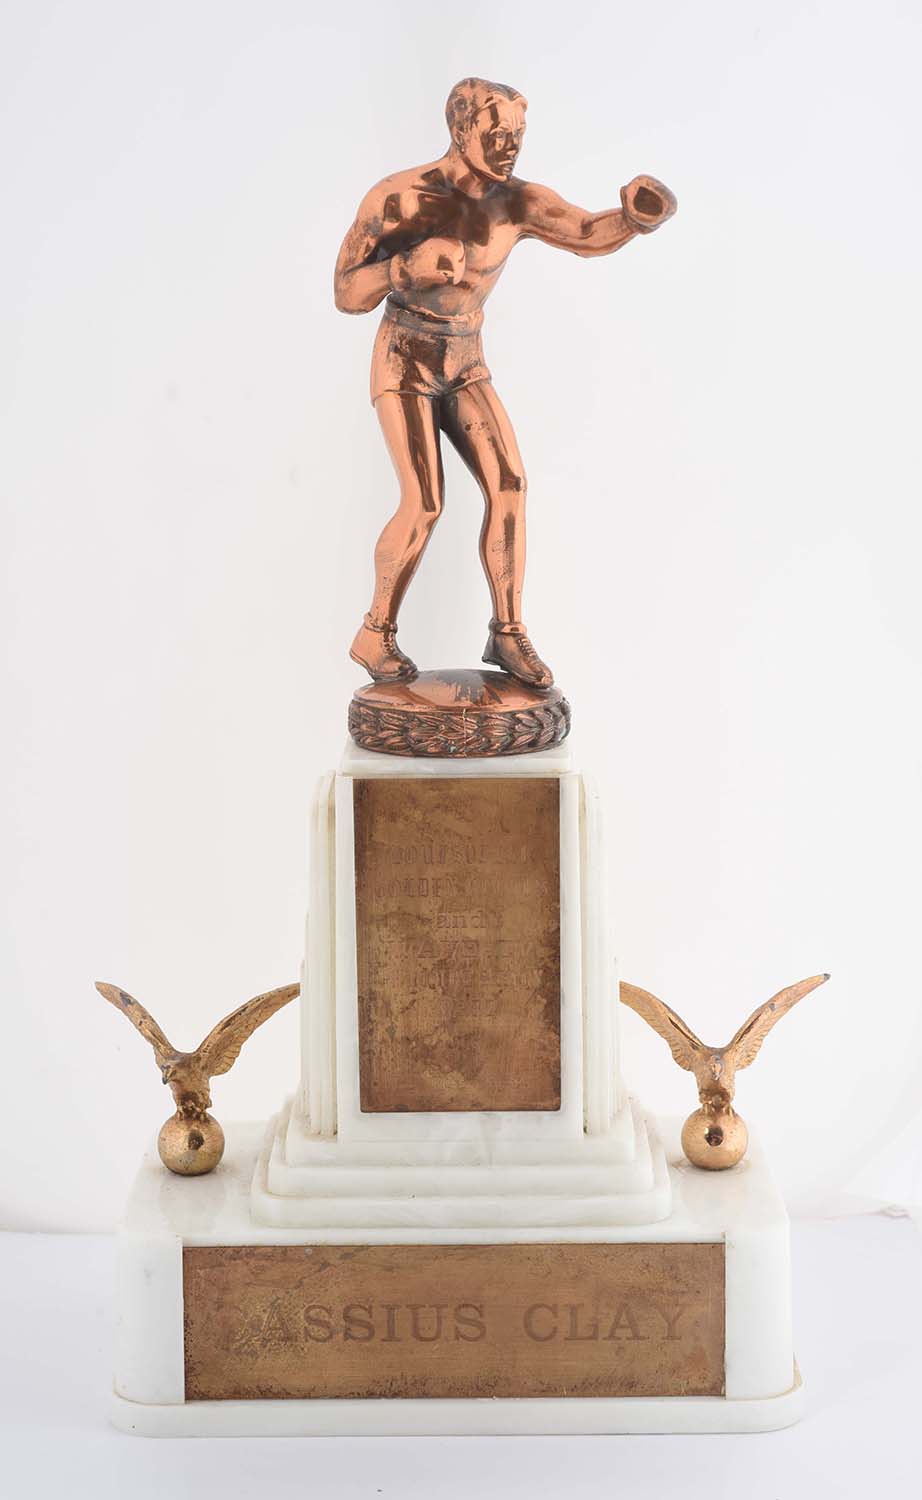 Cassius Clay Louisville Golden Gloves & WAVE TV Future Star Award 1956, estimated at $5,000-10,000.